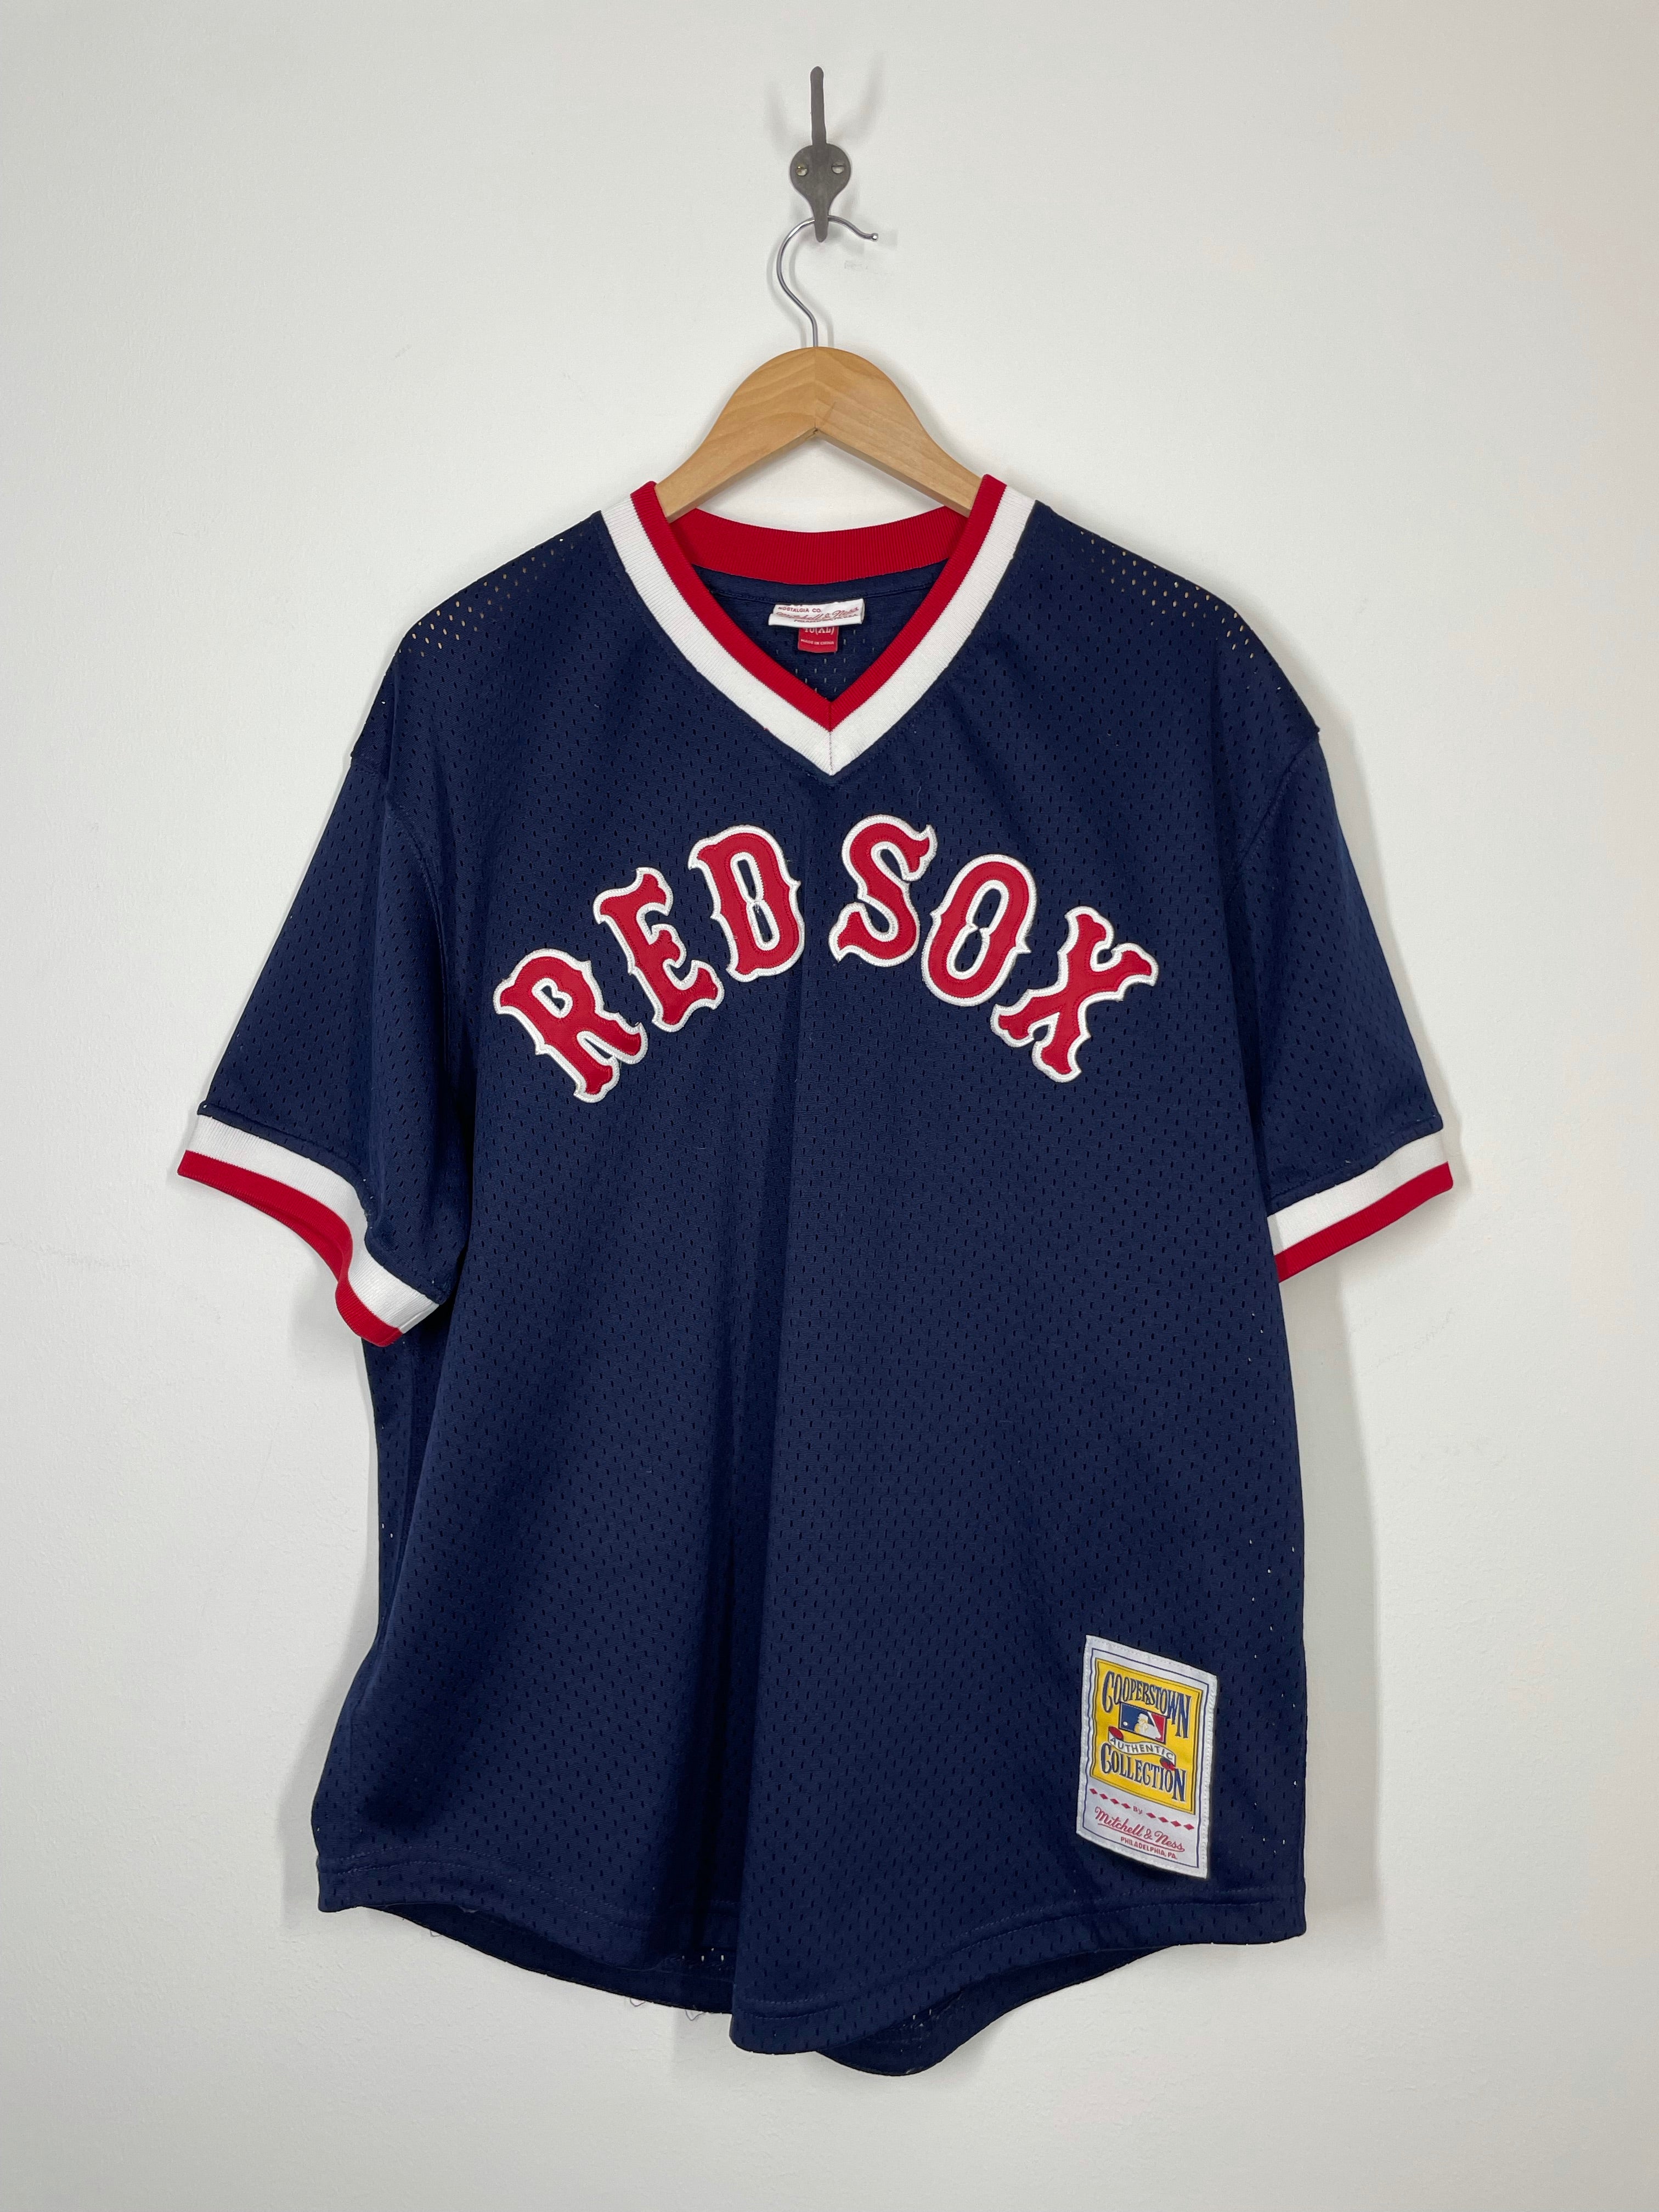 Ted Williams #9 Cooperstown Collection JERSEY sz medium Red Sox